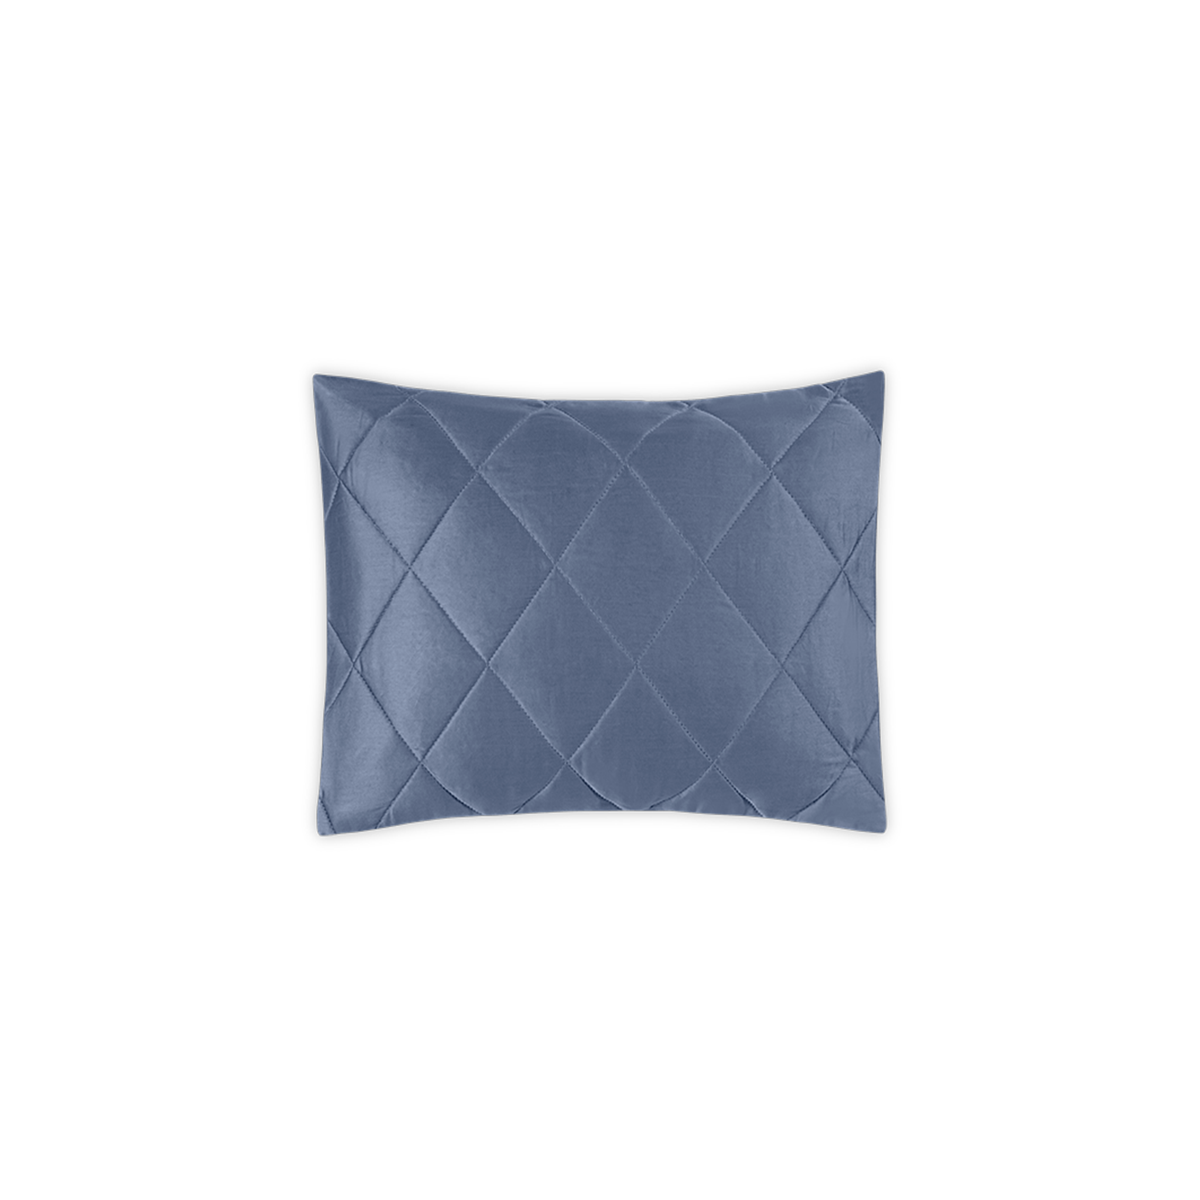 Silo Image of Matouk Nocturne Quilted Bedding Boudoir Sham in Steel Blue